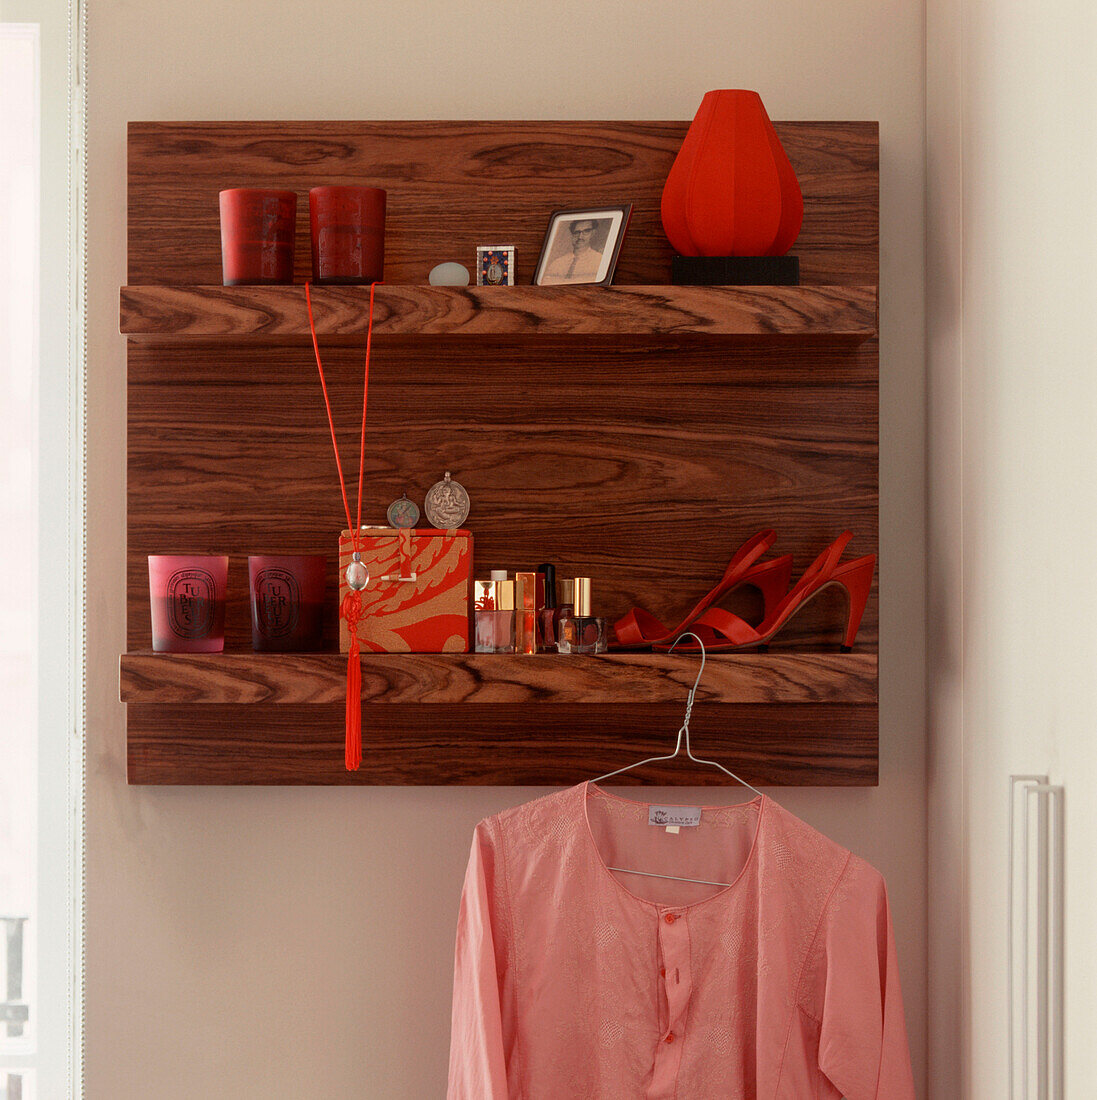 Wooden wall hung shelving unit with personal belongings